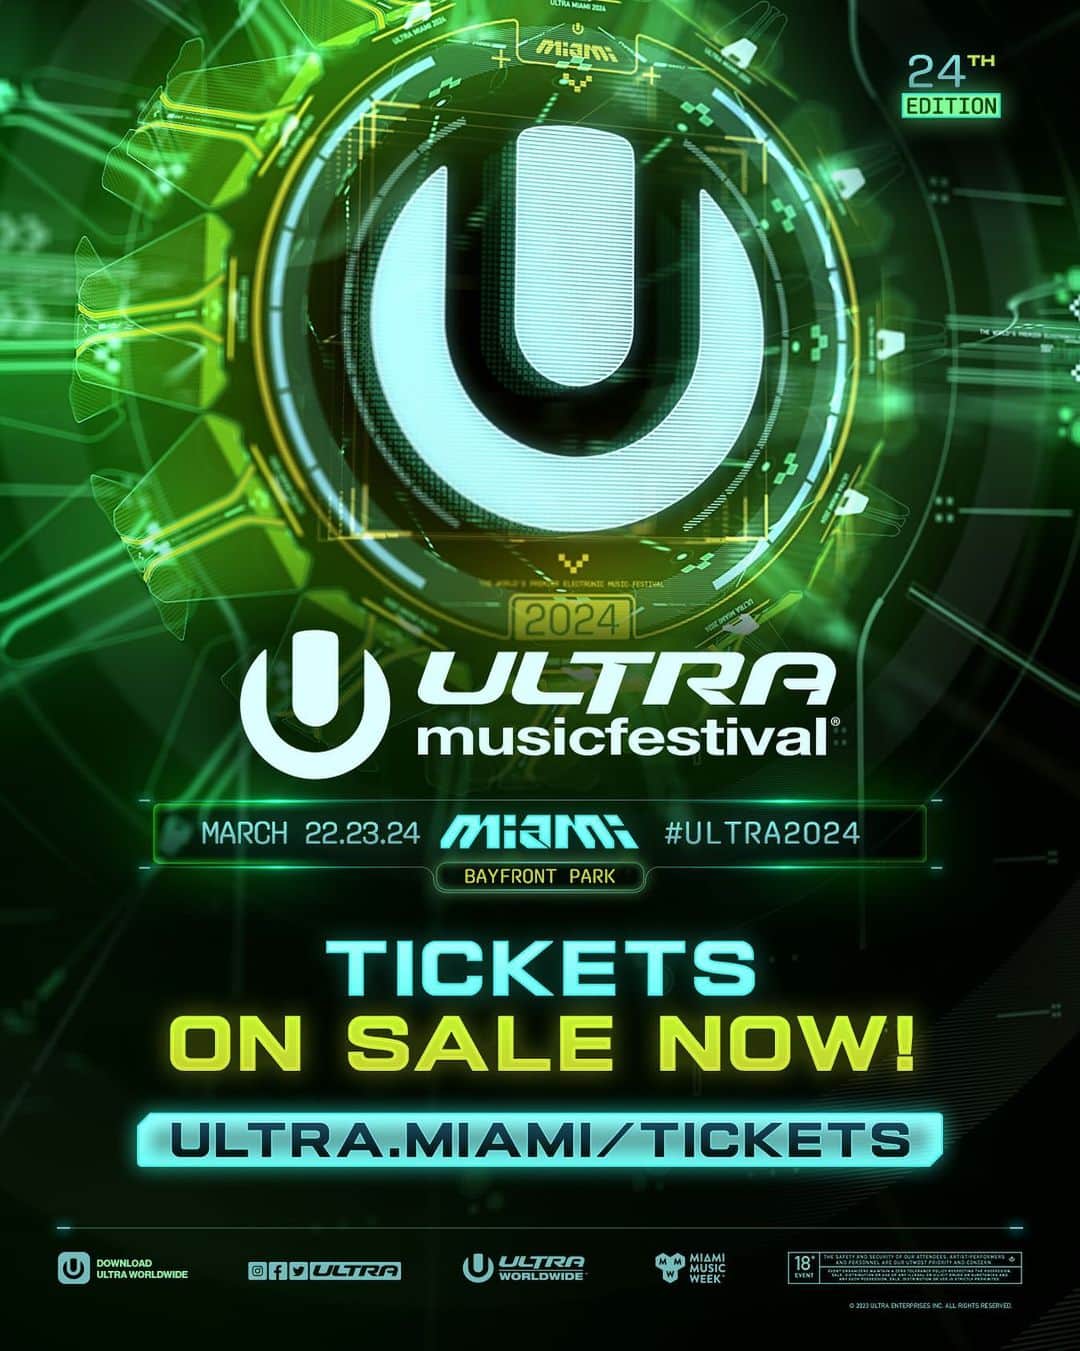 Ultra Music Festivalのインスタグラム：「It’s that time! Limited tickets to #Ultra2024 are ON SALE NOW! Don’t wait, buy now to guarantee the best-priced tickets ➡️ ultra.miami/tickets」